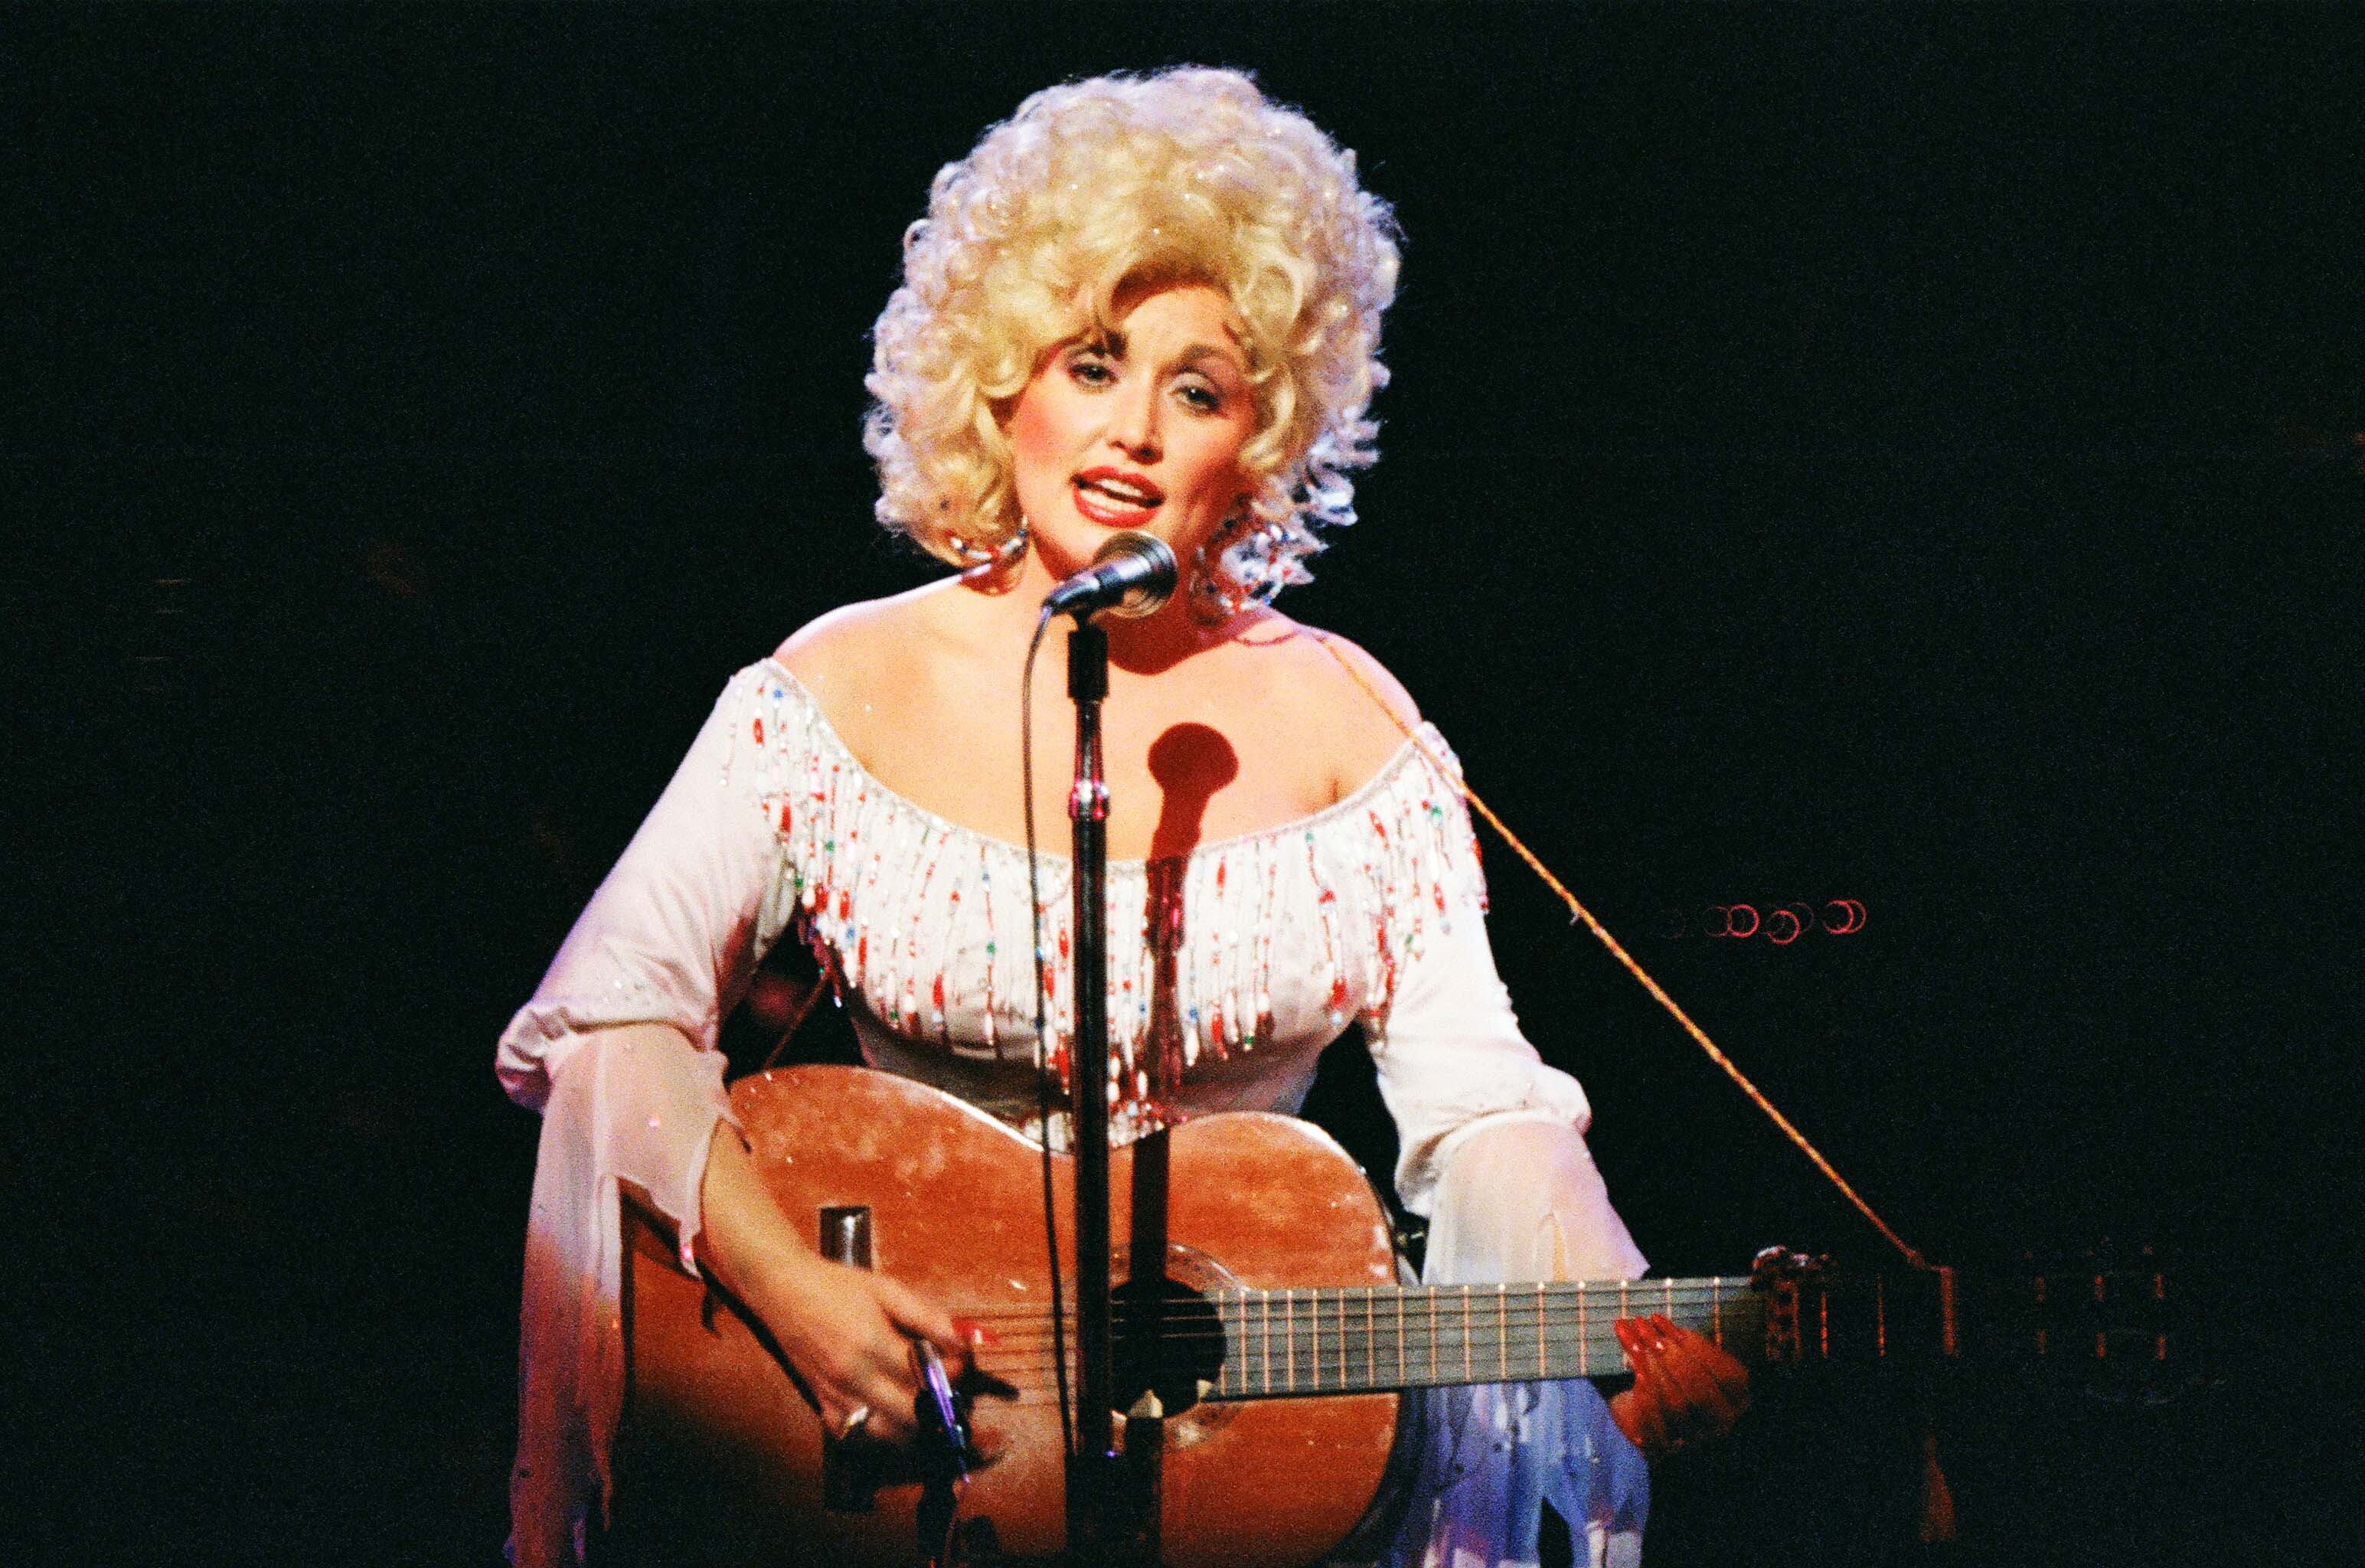 Dolly Parton performs on stage at The Dominion Theatre